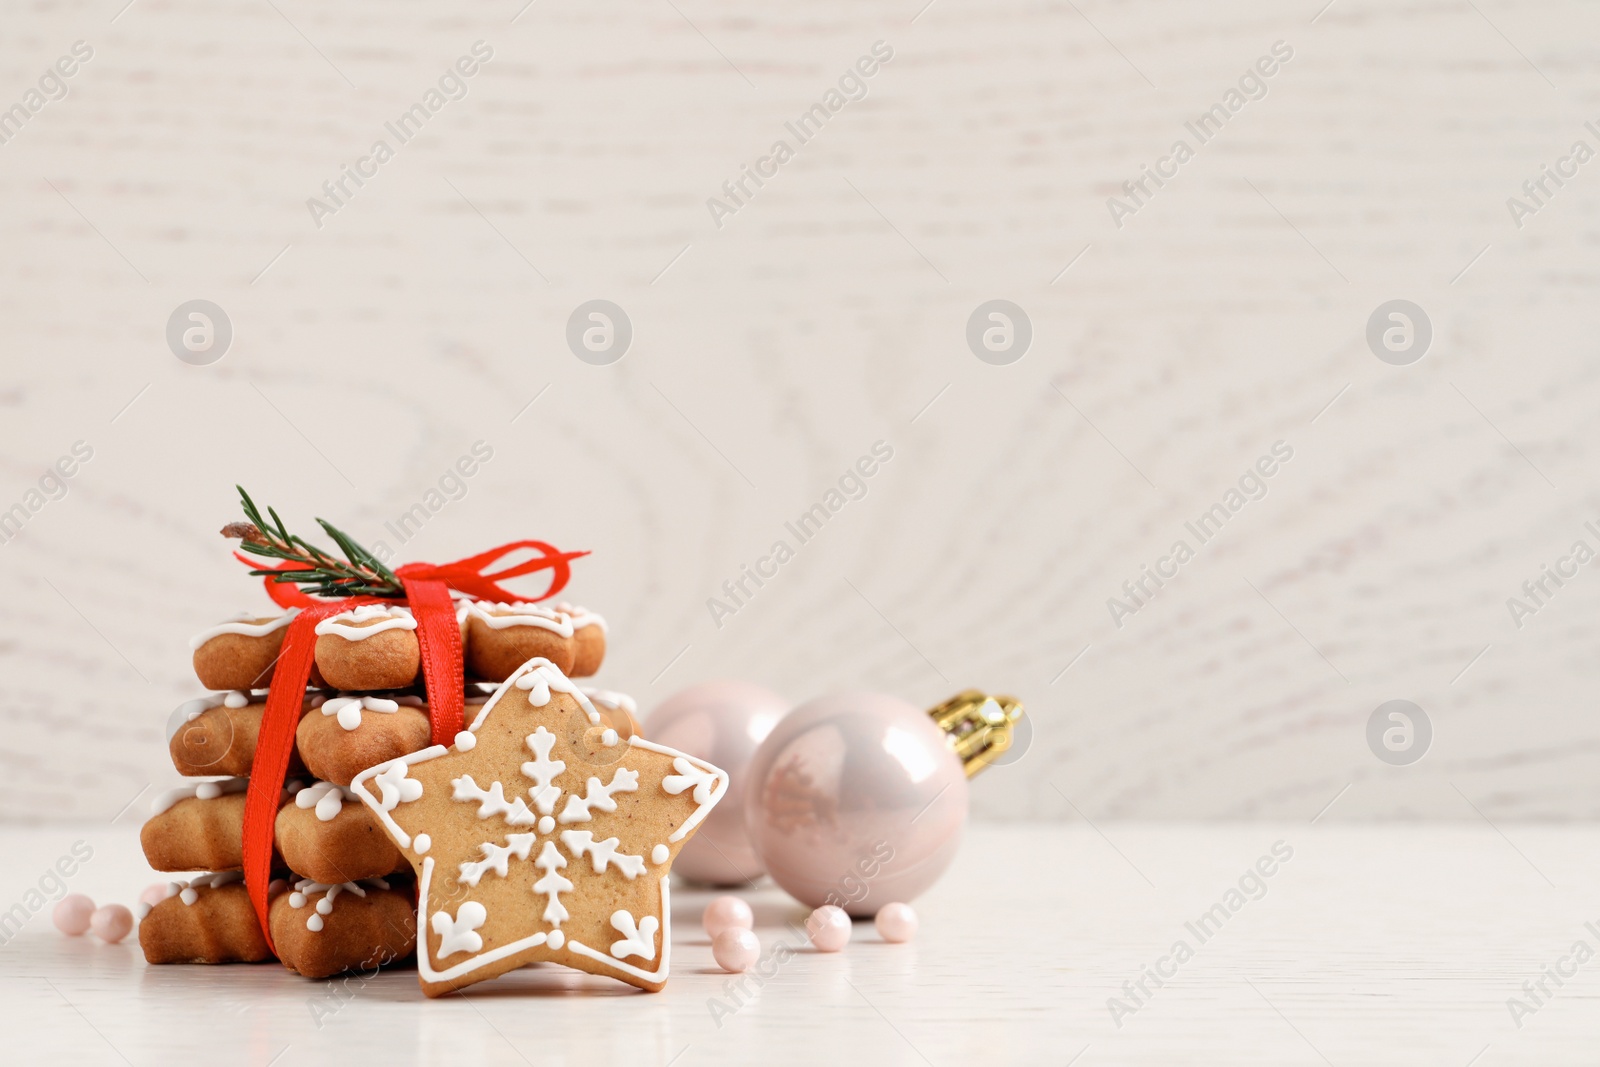 Photo of Tasty Christmas cookies tied with red ribbon near festive decor on beige wooden table, space for text